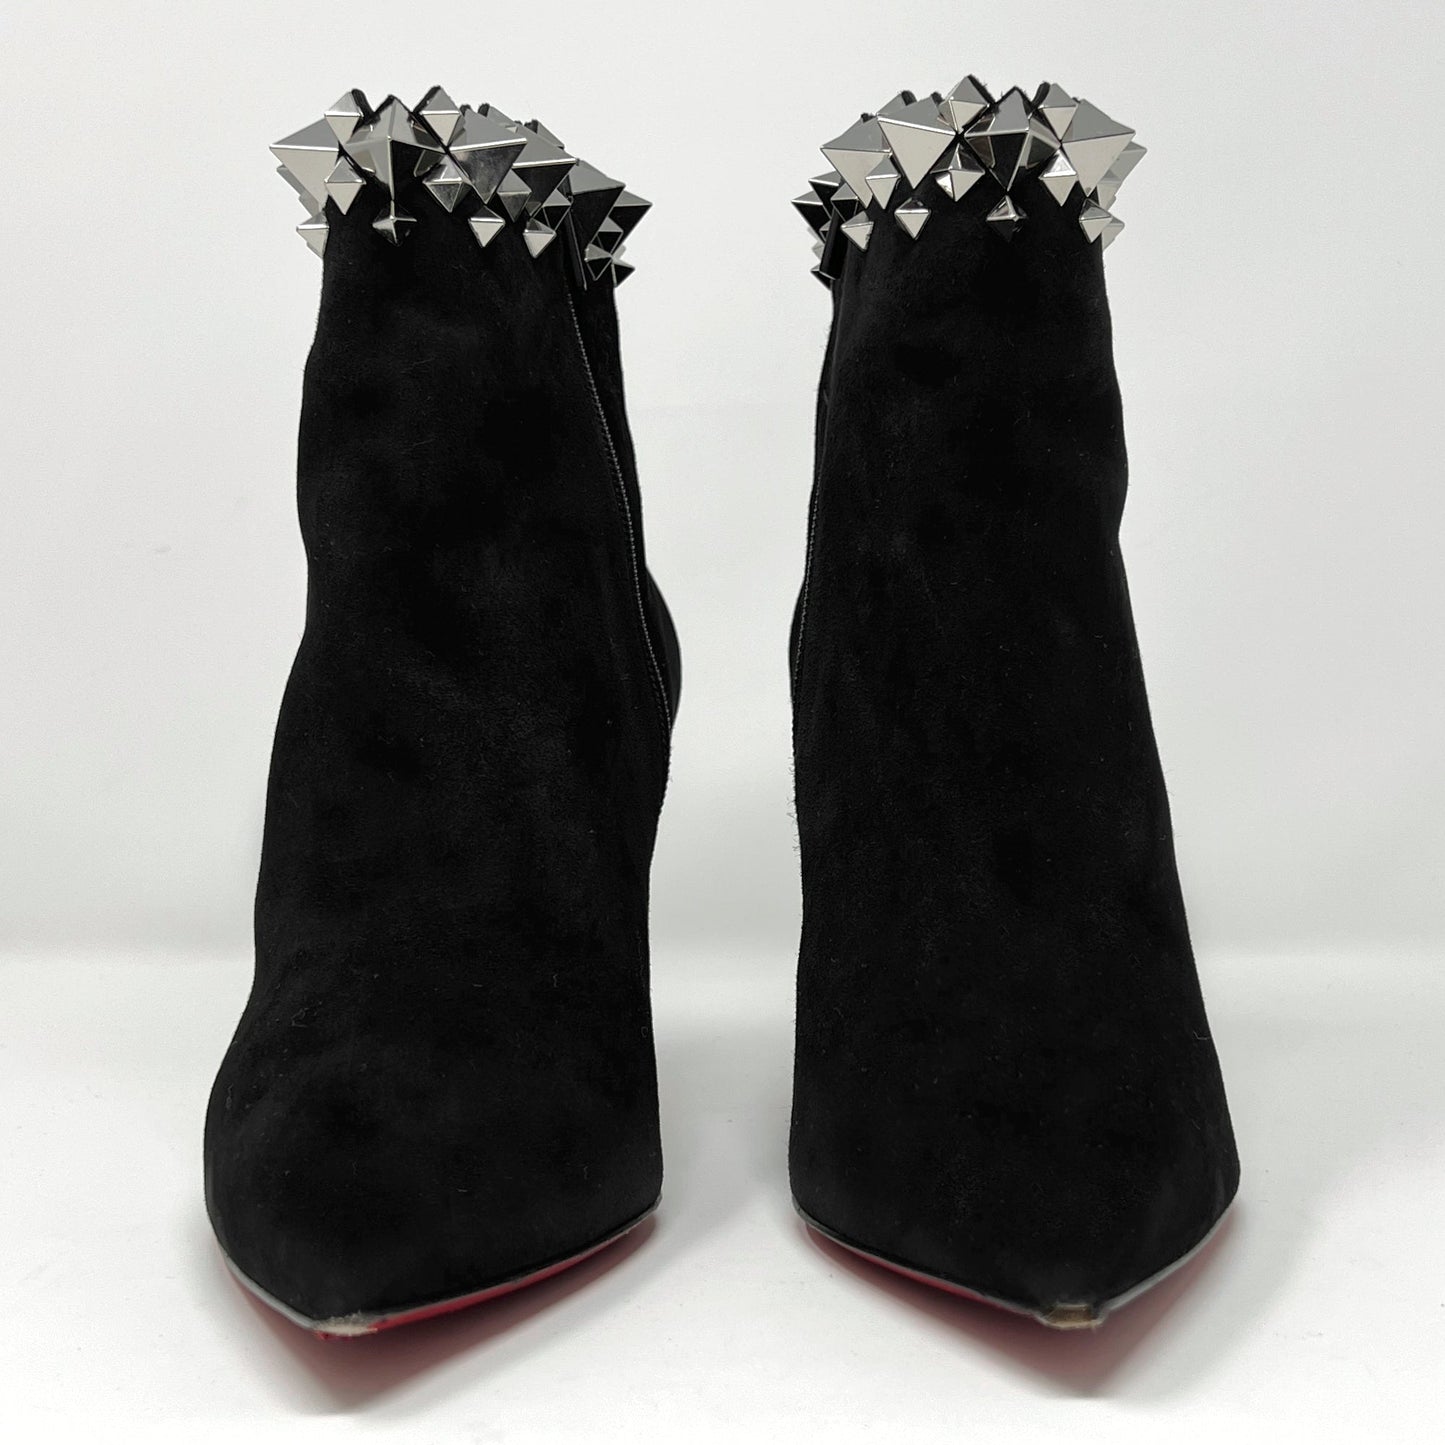 Christian Louboutin Firmamma Black Suede Silver Spike Studded Ankle Boots Size EU 39